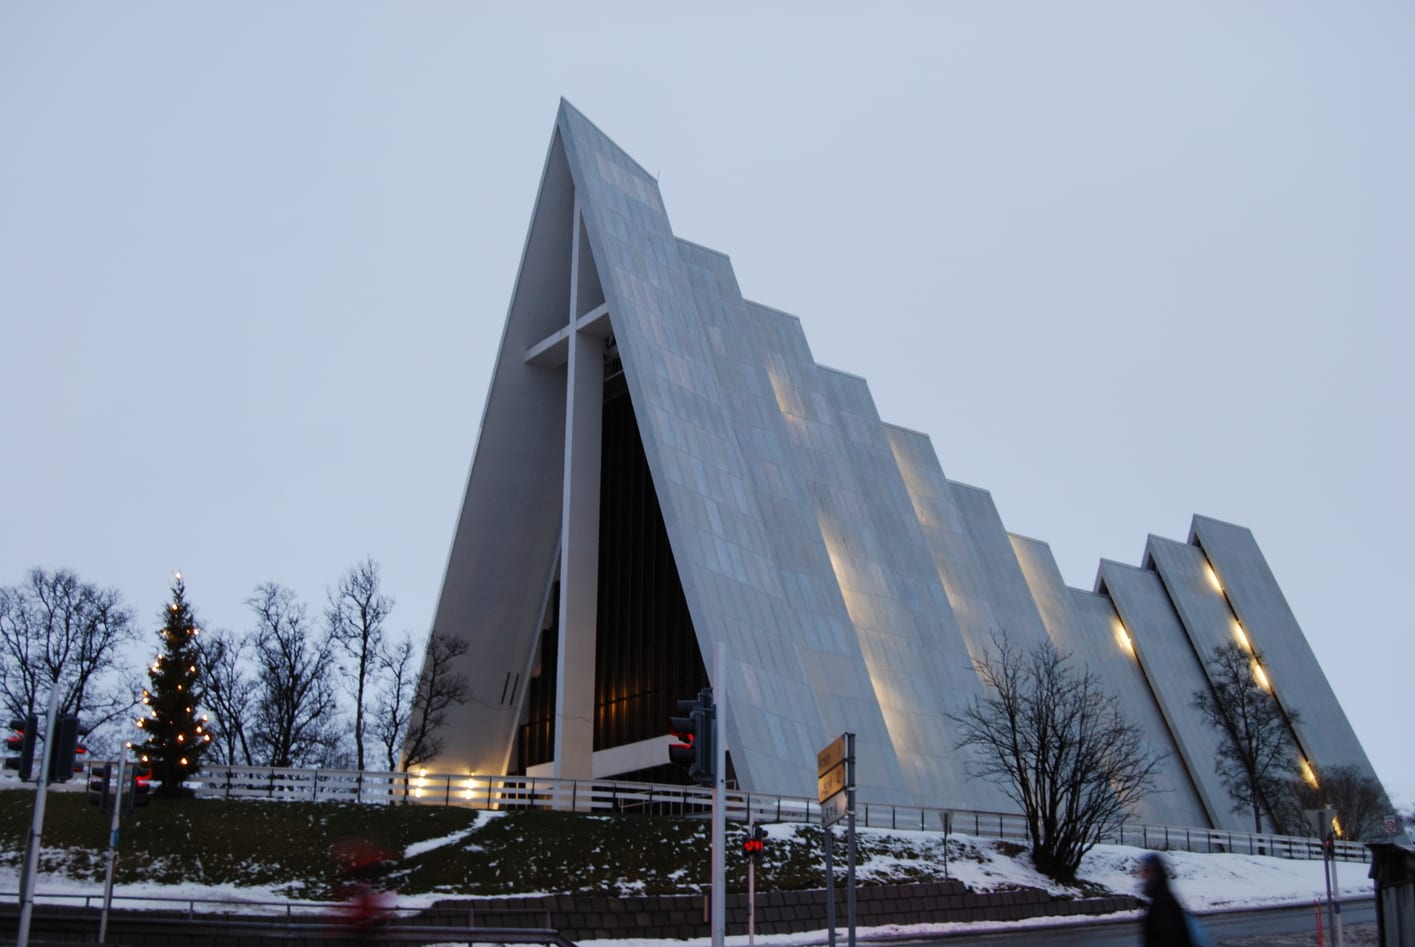 The Arctic Cathedral, one of the top tourist attractions in Tromso, Norway